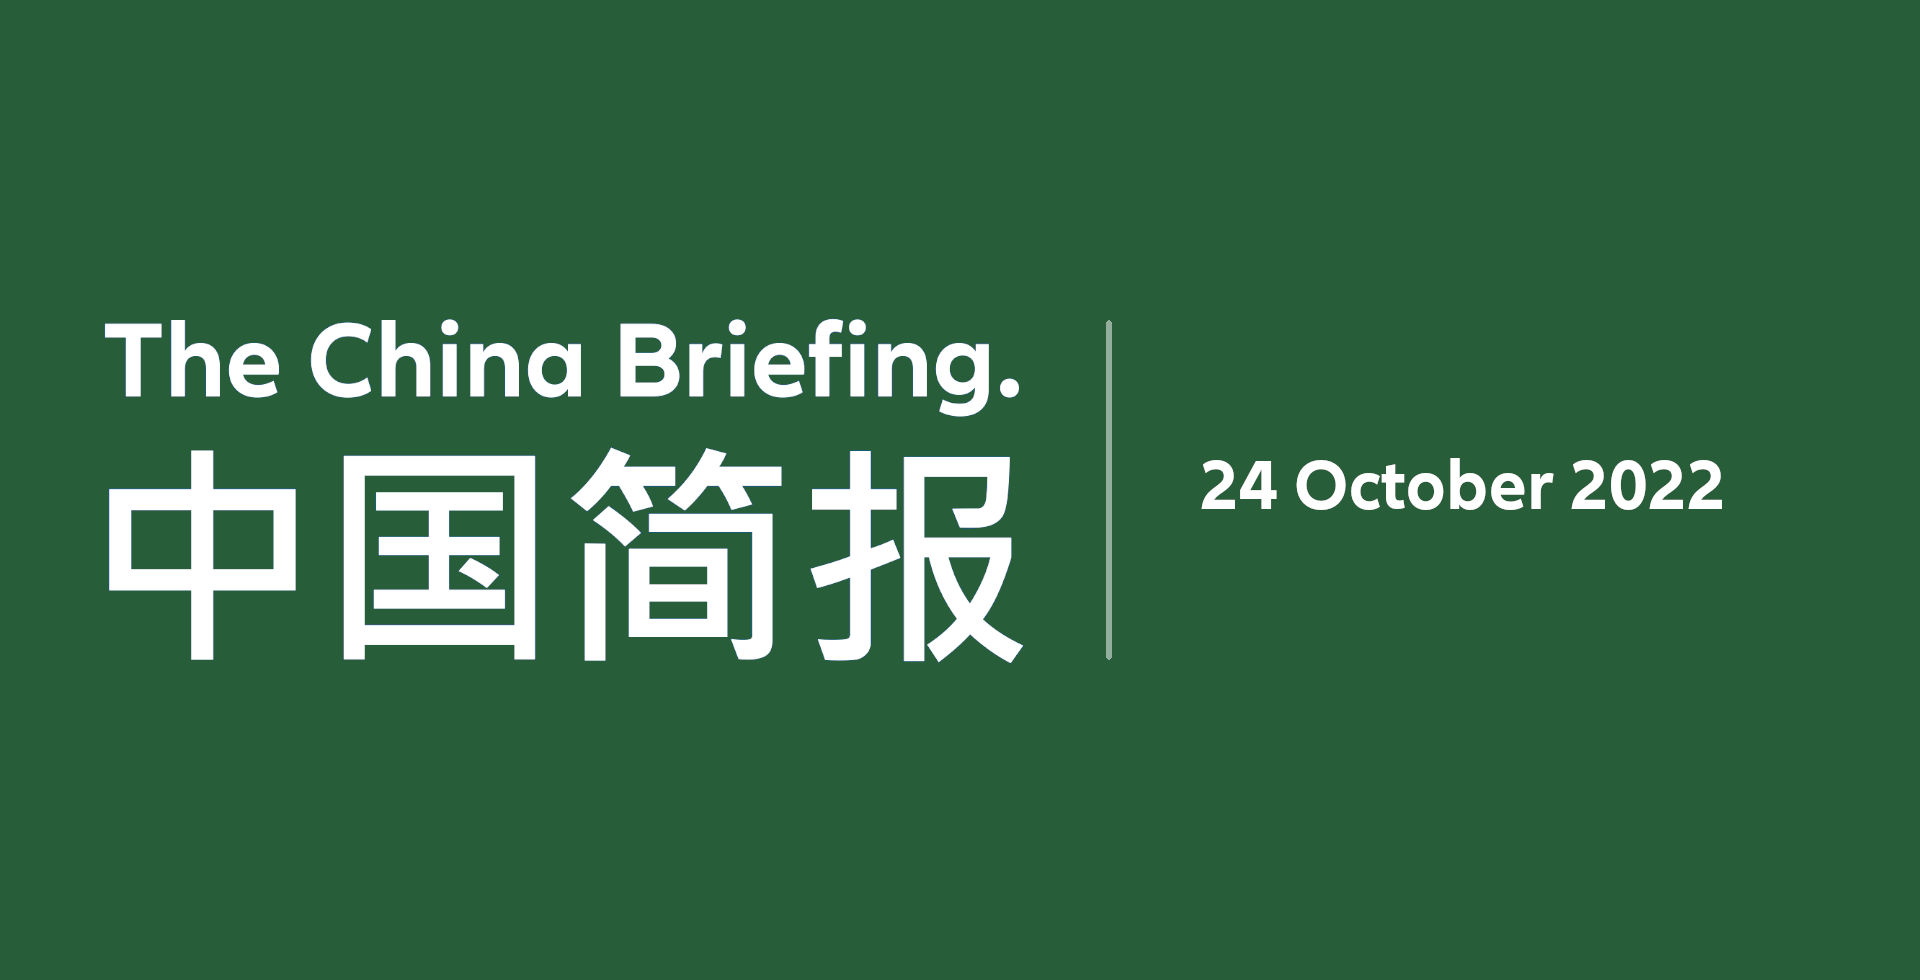 The China Briefing 24th of October 2022